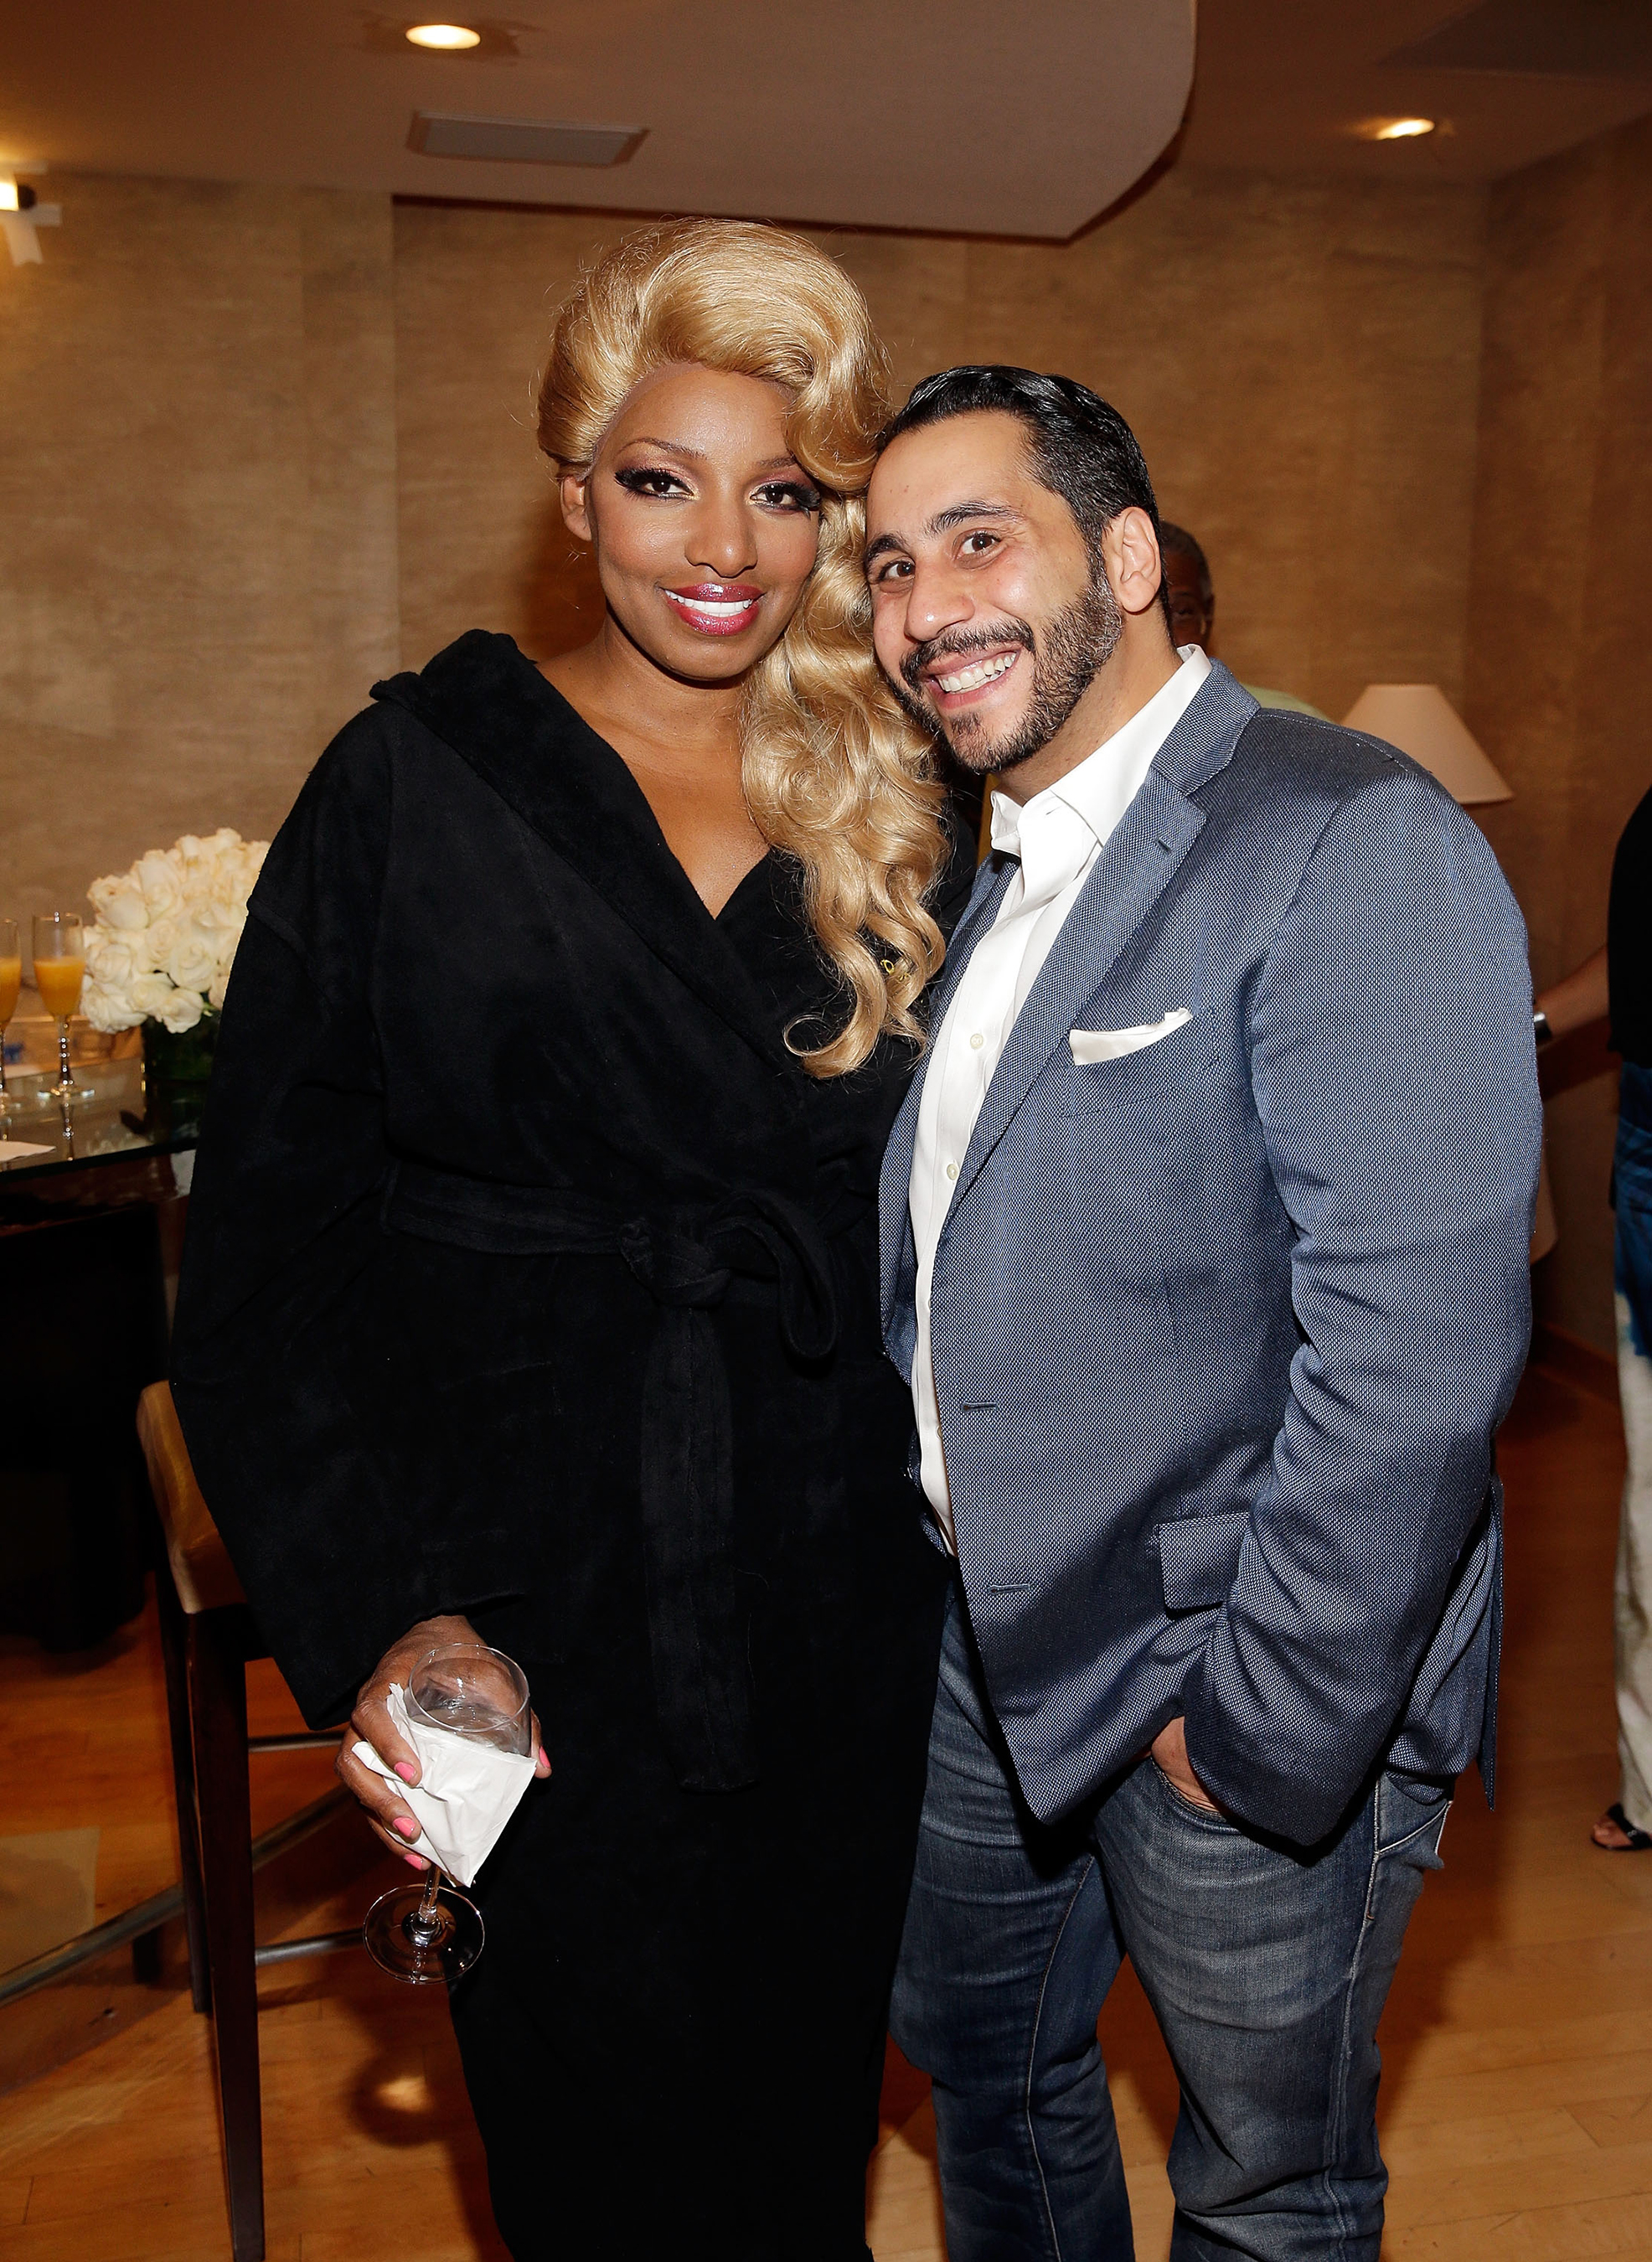 NeNe Leakes and couturier Gilbert A. Chagoury at her debut performance in Zumanity, The Sensual Side of Cirque du Soleil in Las Vegas on June 27, 2014. Photo Credit: Isaac Brekken/Getty Images